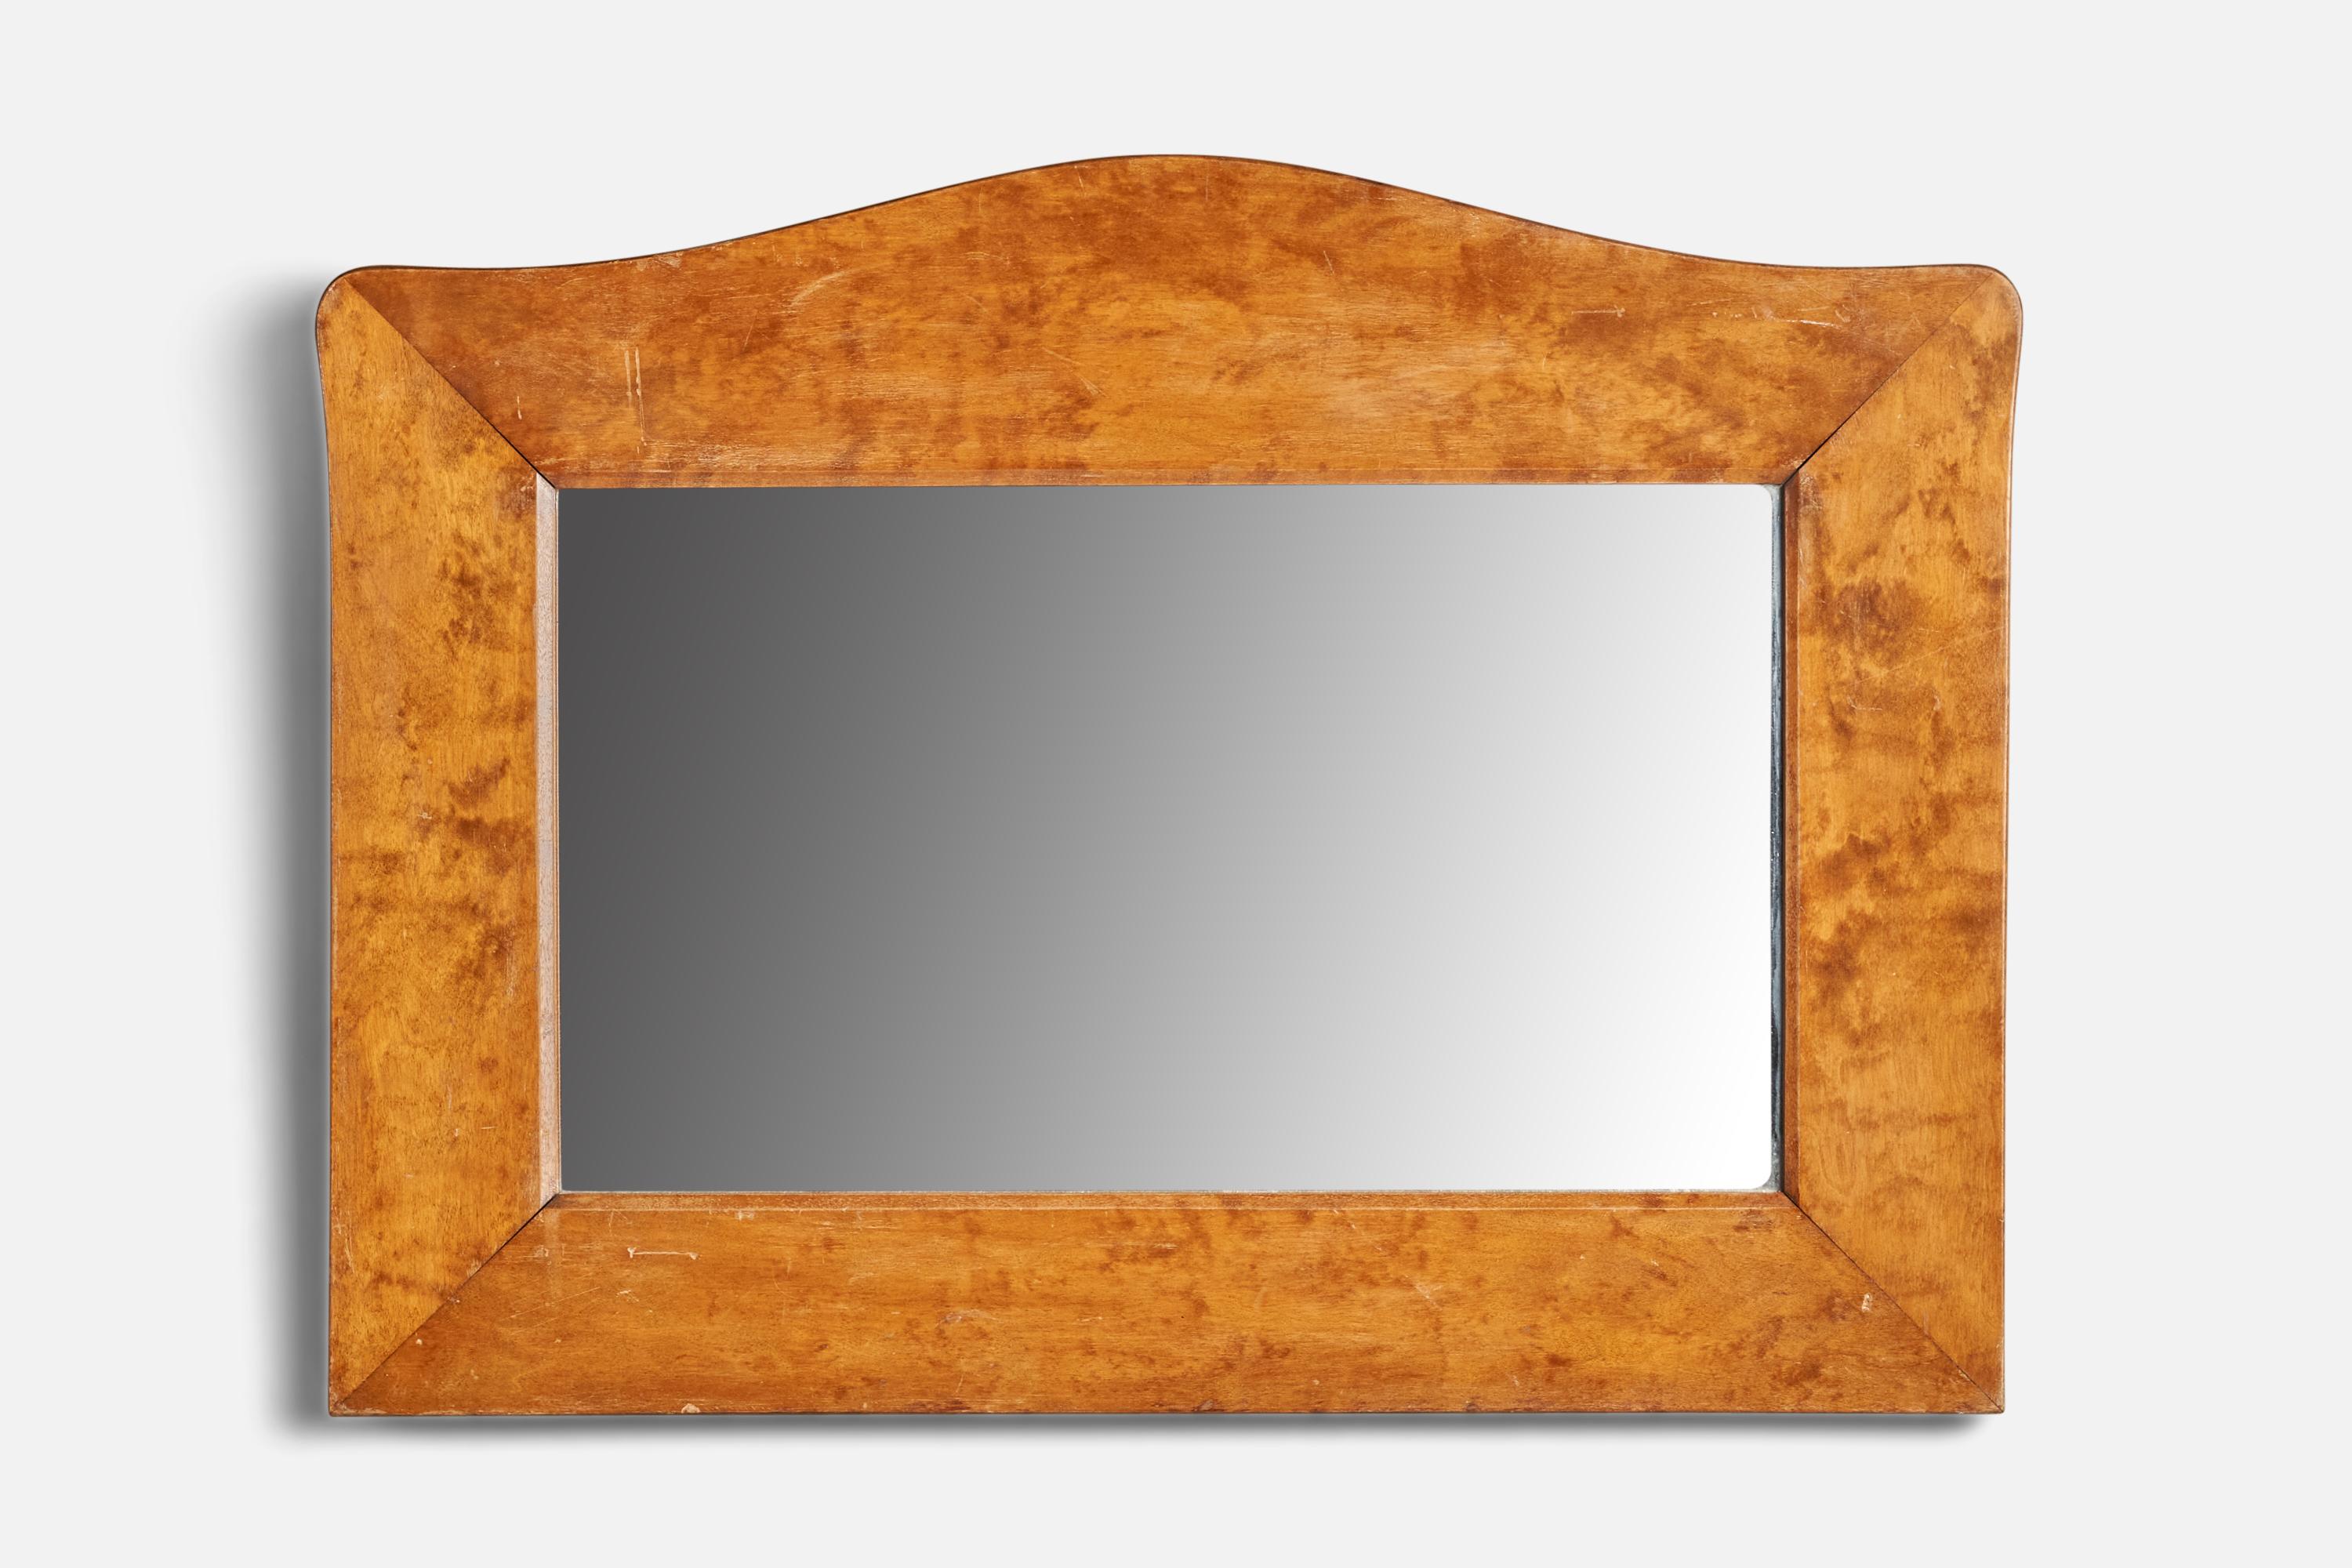 A birch wall mirror designed and produced in Sweden, 1920s.

Has deep scratches in the middle of glass